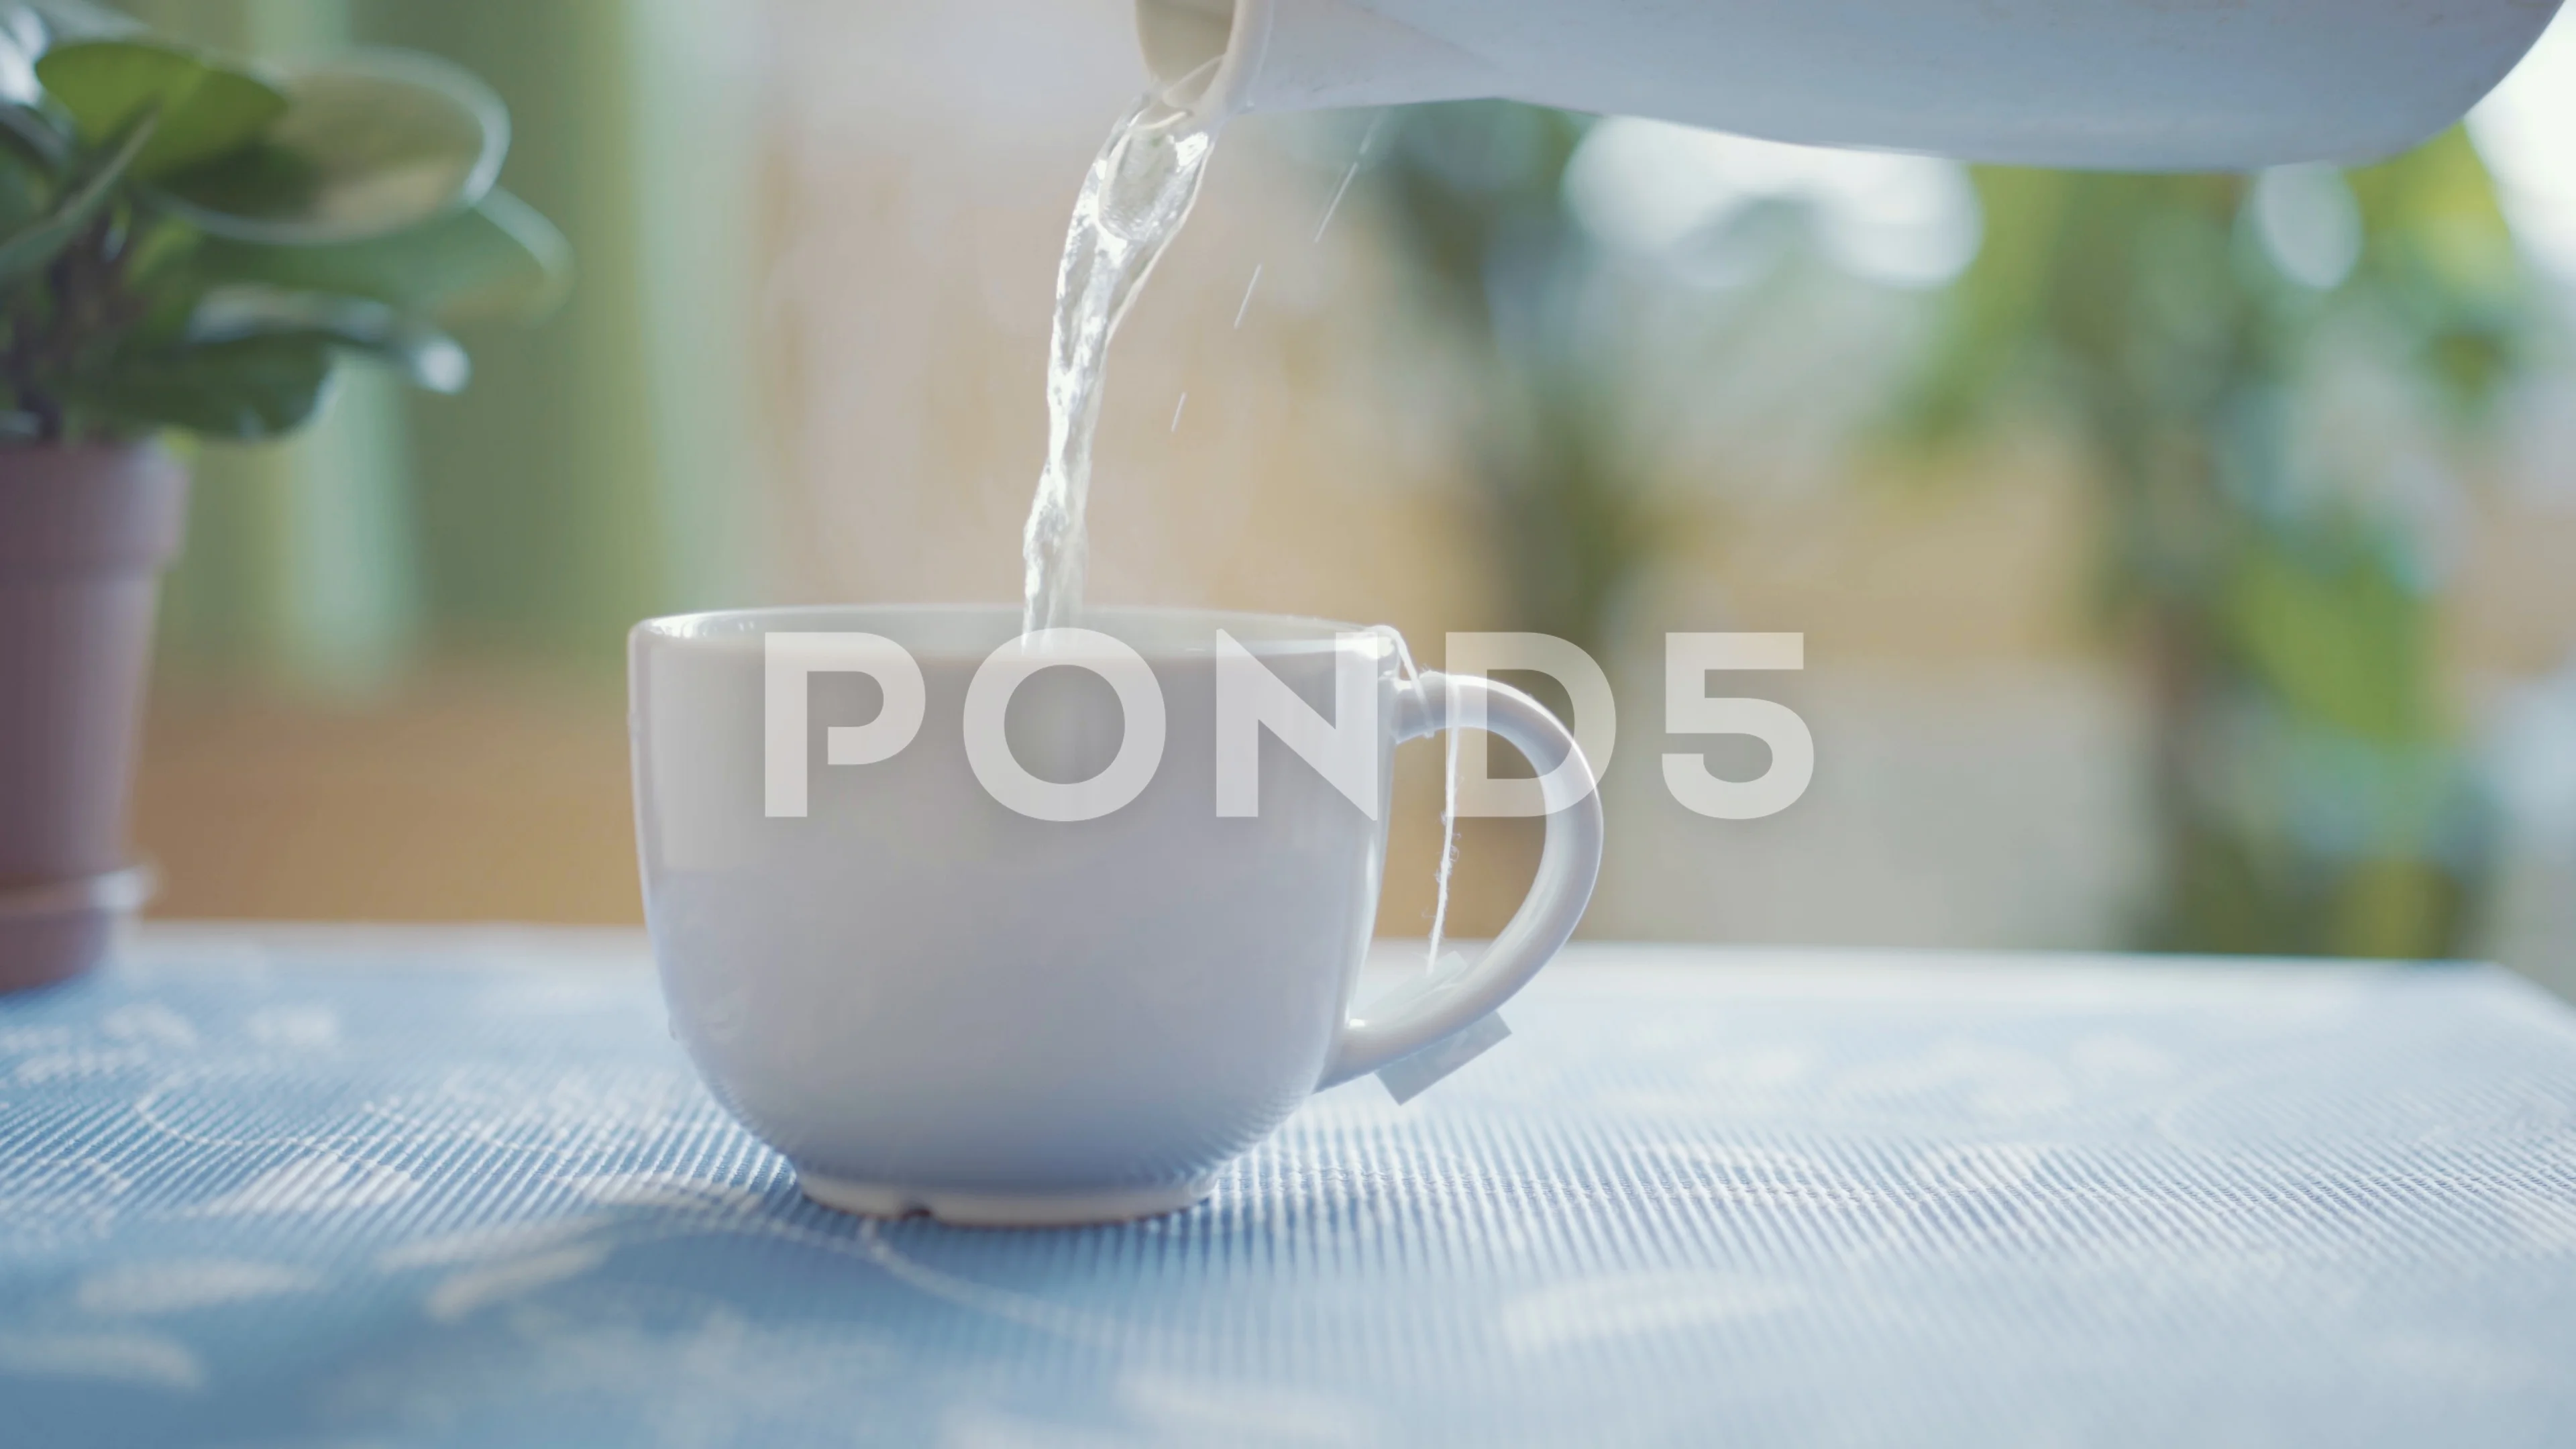 https://images.pond5.com/pouring-hot-boiling-water-cup-footage-103085171_prevstill.jpeg